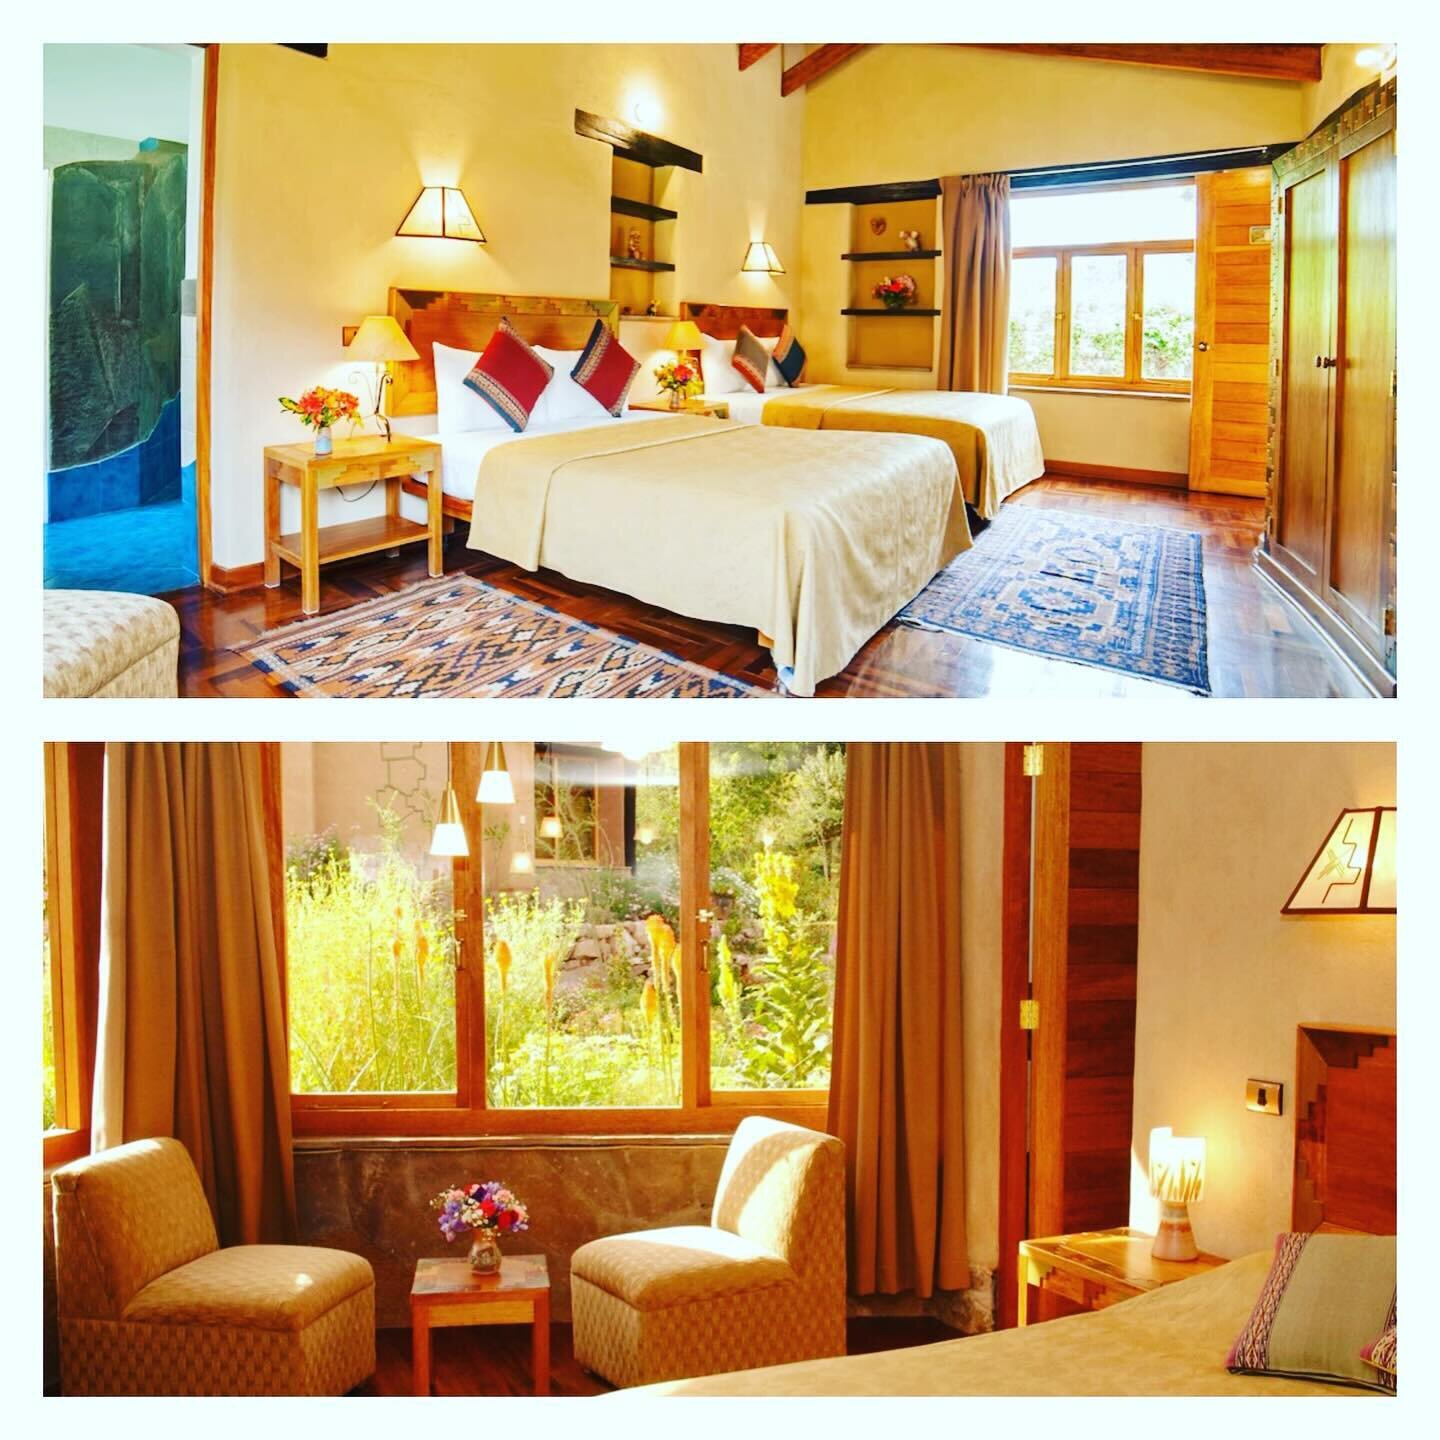 ⛰️PERU 2️⃣0️⃣2️⃣4️⃣ 🇵🇪 Luxury Shared QUEEN - Double Occupancy
IS WAITING FOR YOU!!!

$3,450 per person - ONLY 4 BEDS LEFT

10 MONTH PAYMENT PLAN OFFERED FOR LIMITED TIME ONLY!

This Willka T&rsquo;ika&rsquo;s sustainable luxury room with two Queen 